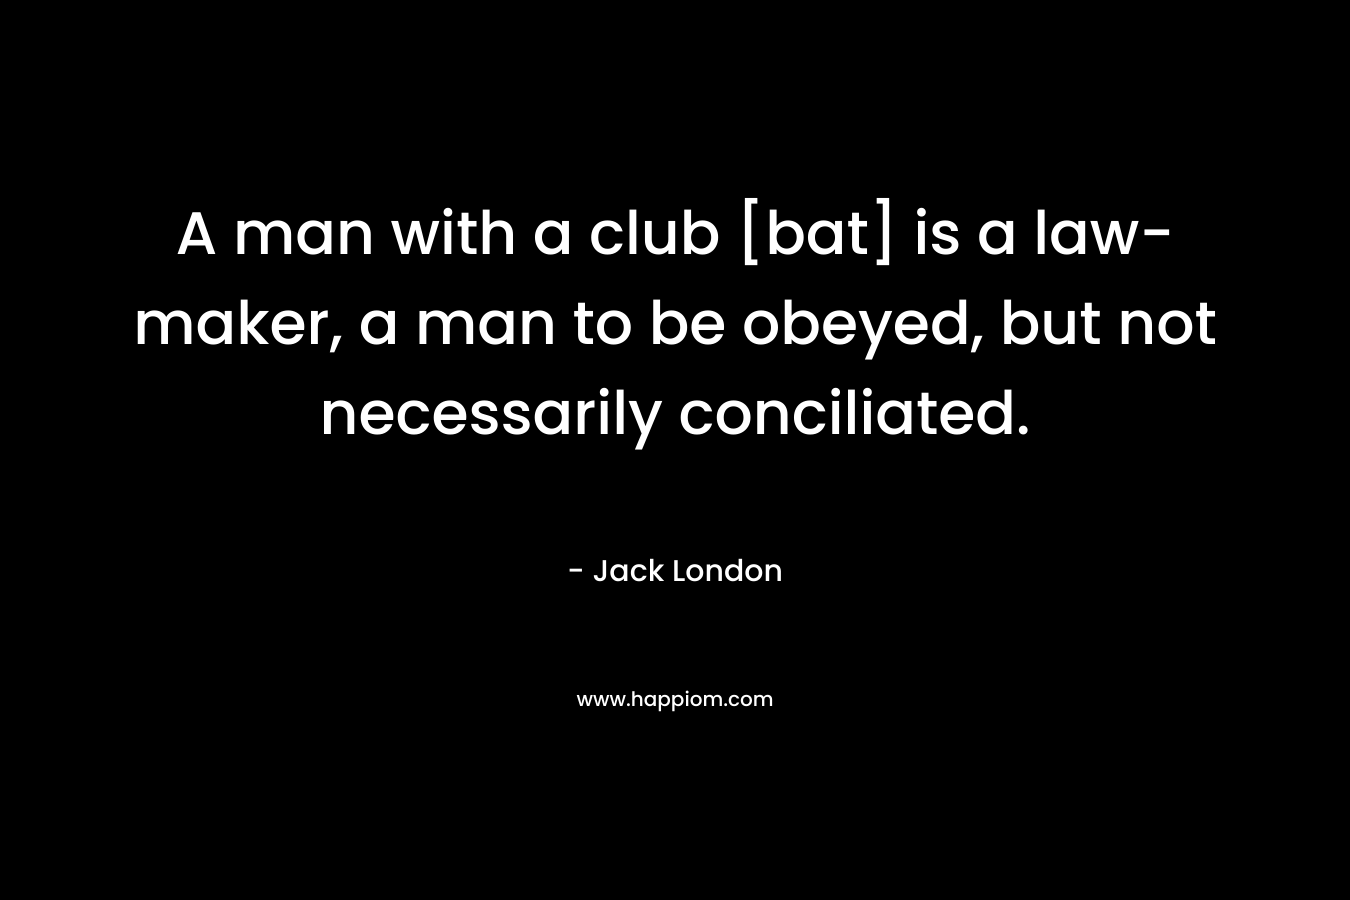 A man with a club [bat] is a law-maker, a man to be obeyed, but not necessarily conciliated.